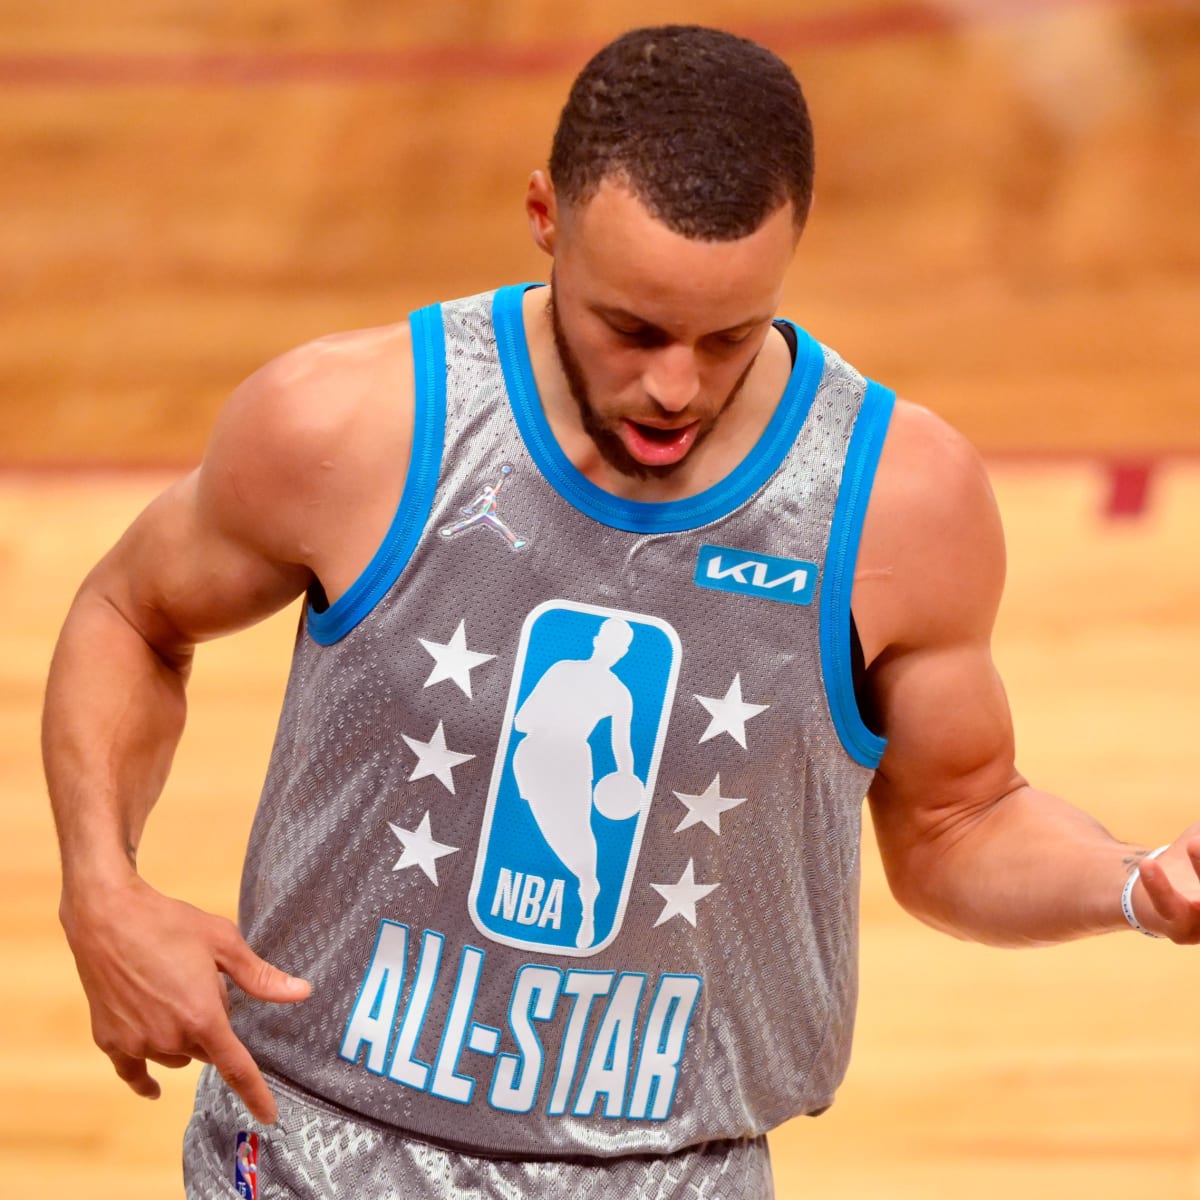 NBA All-Star Game: LeBron James and Steph Curry put on a show in Team James  victory over Team Durant